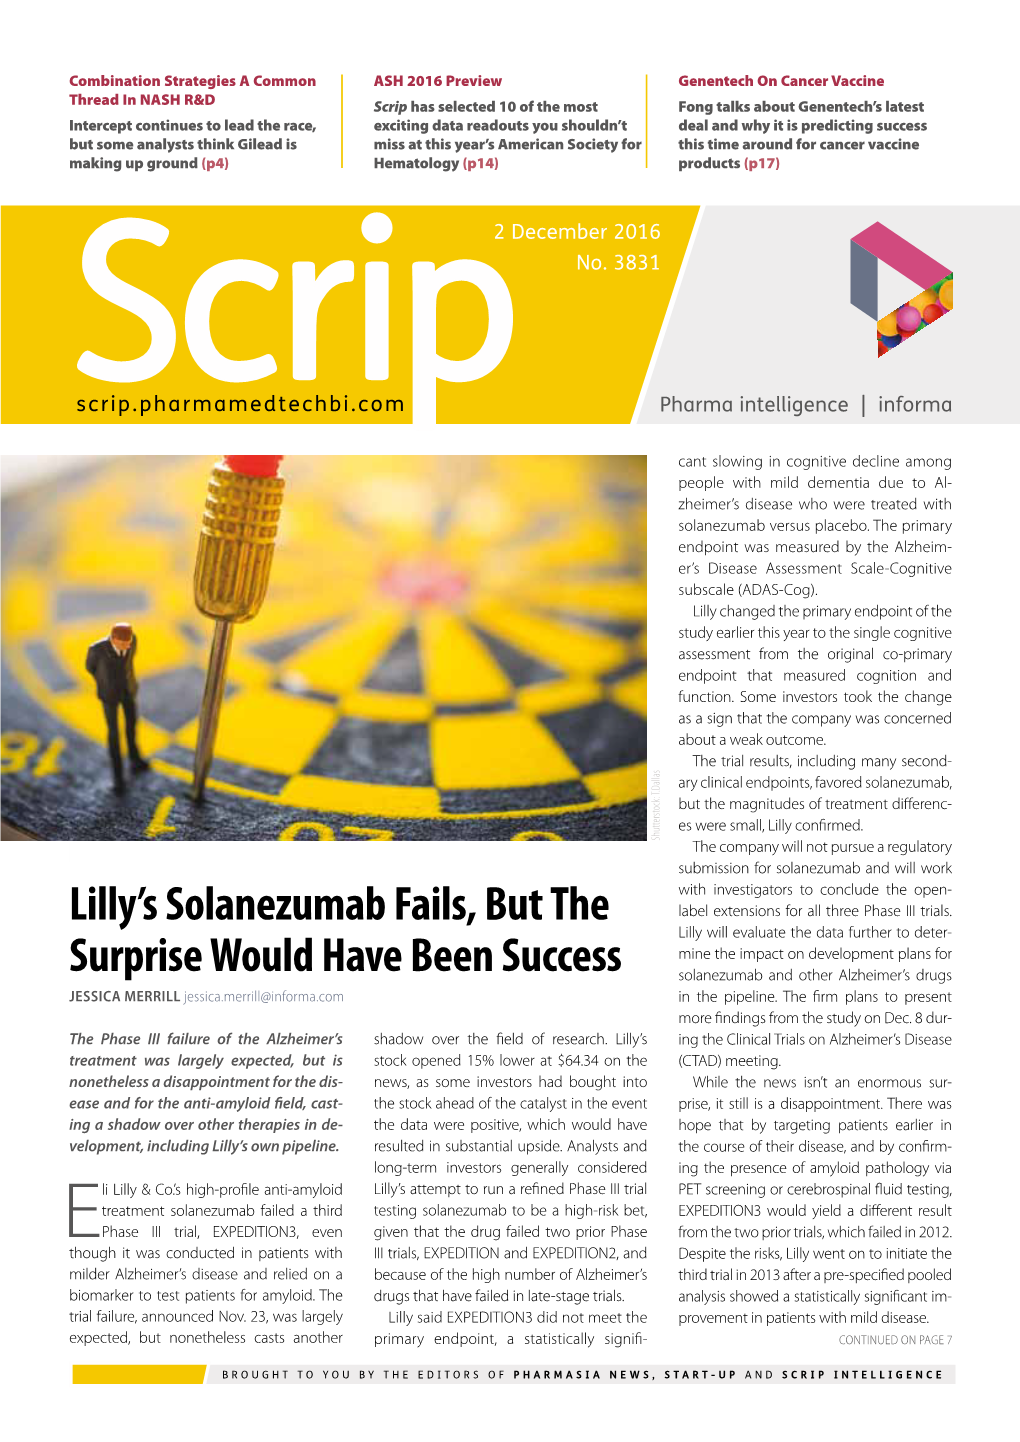 Lilly's Solanezumab Fails, but the Surprise Would Have Been Success